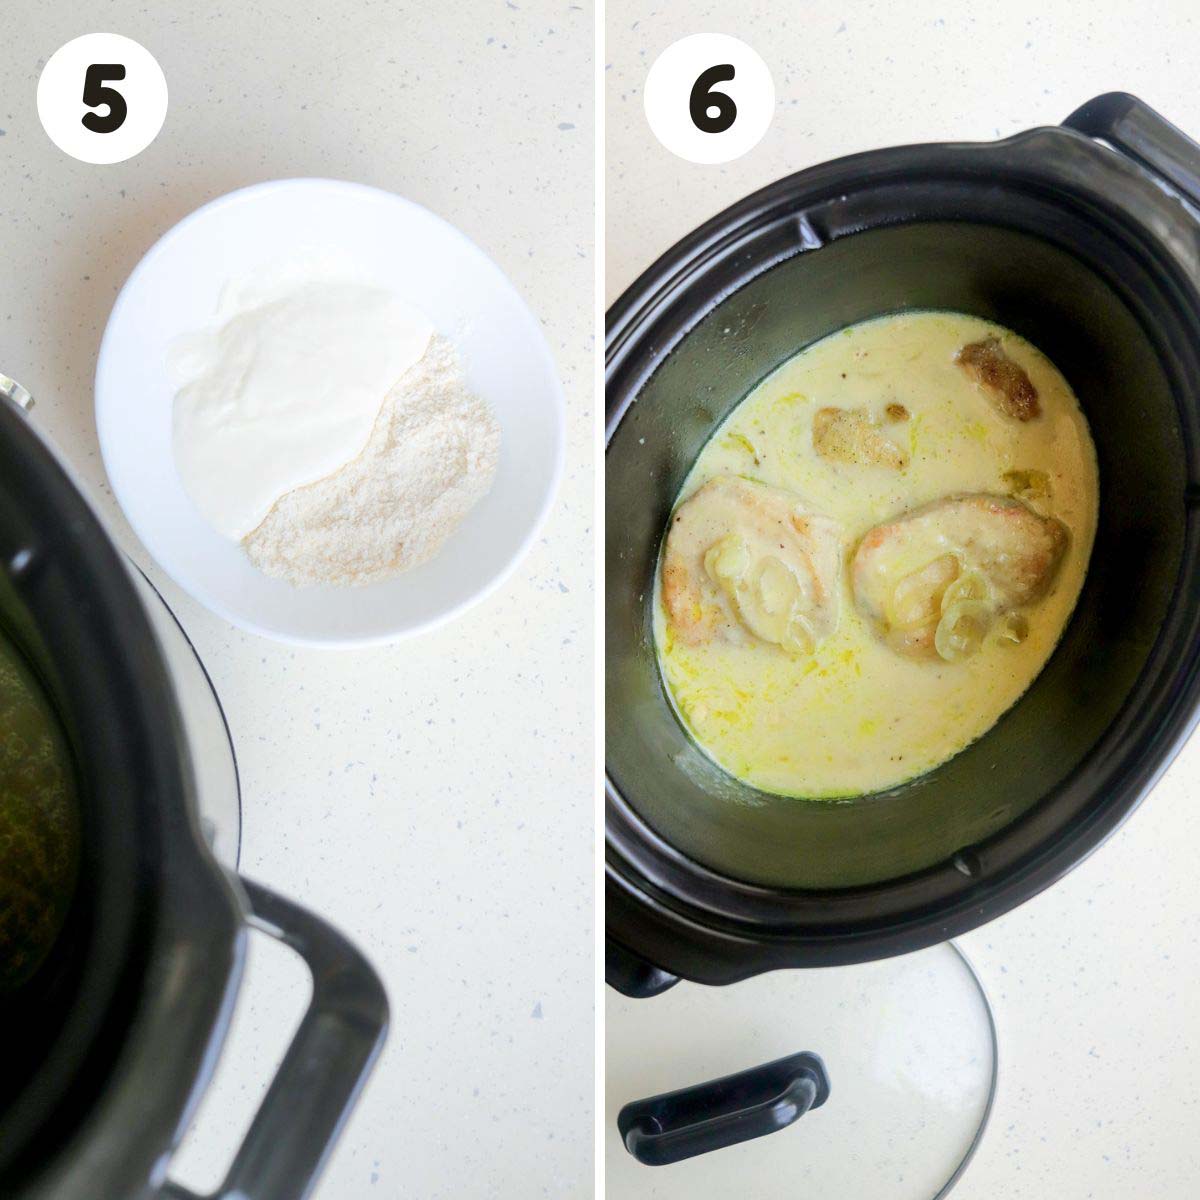 two image process making slow cooker sour cream pork chops.